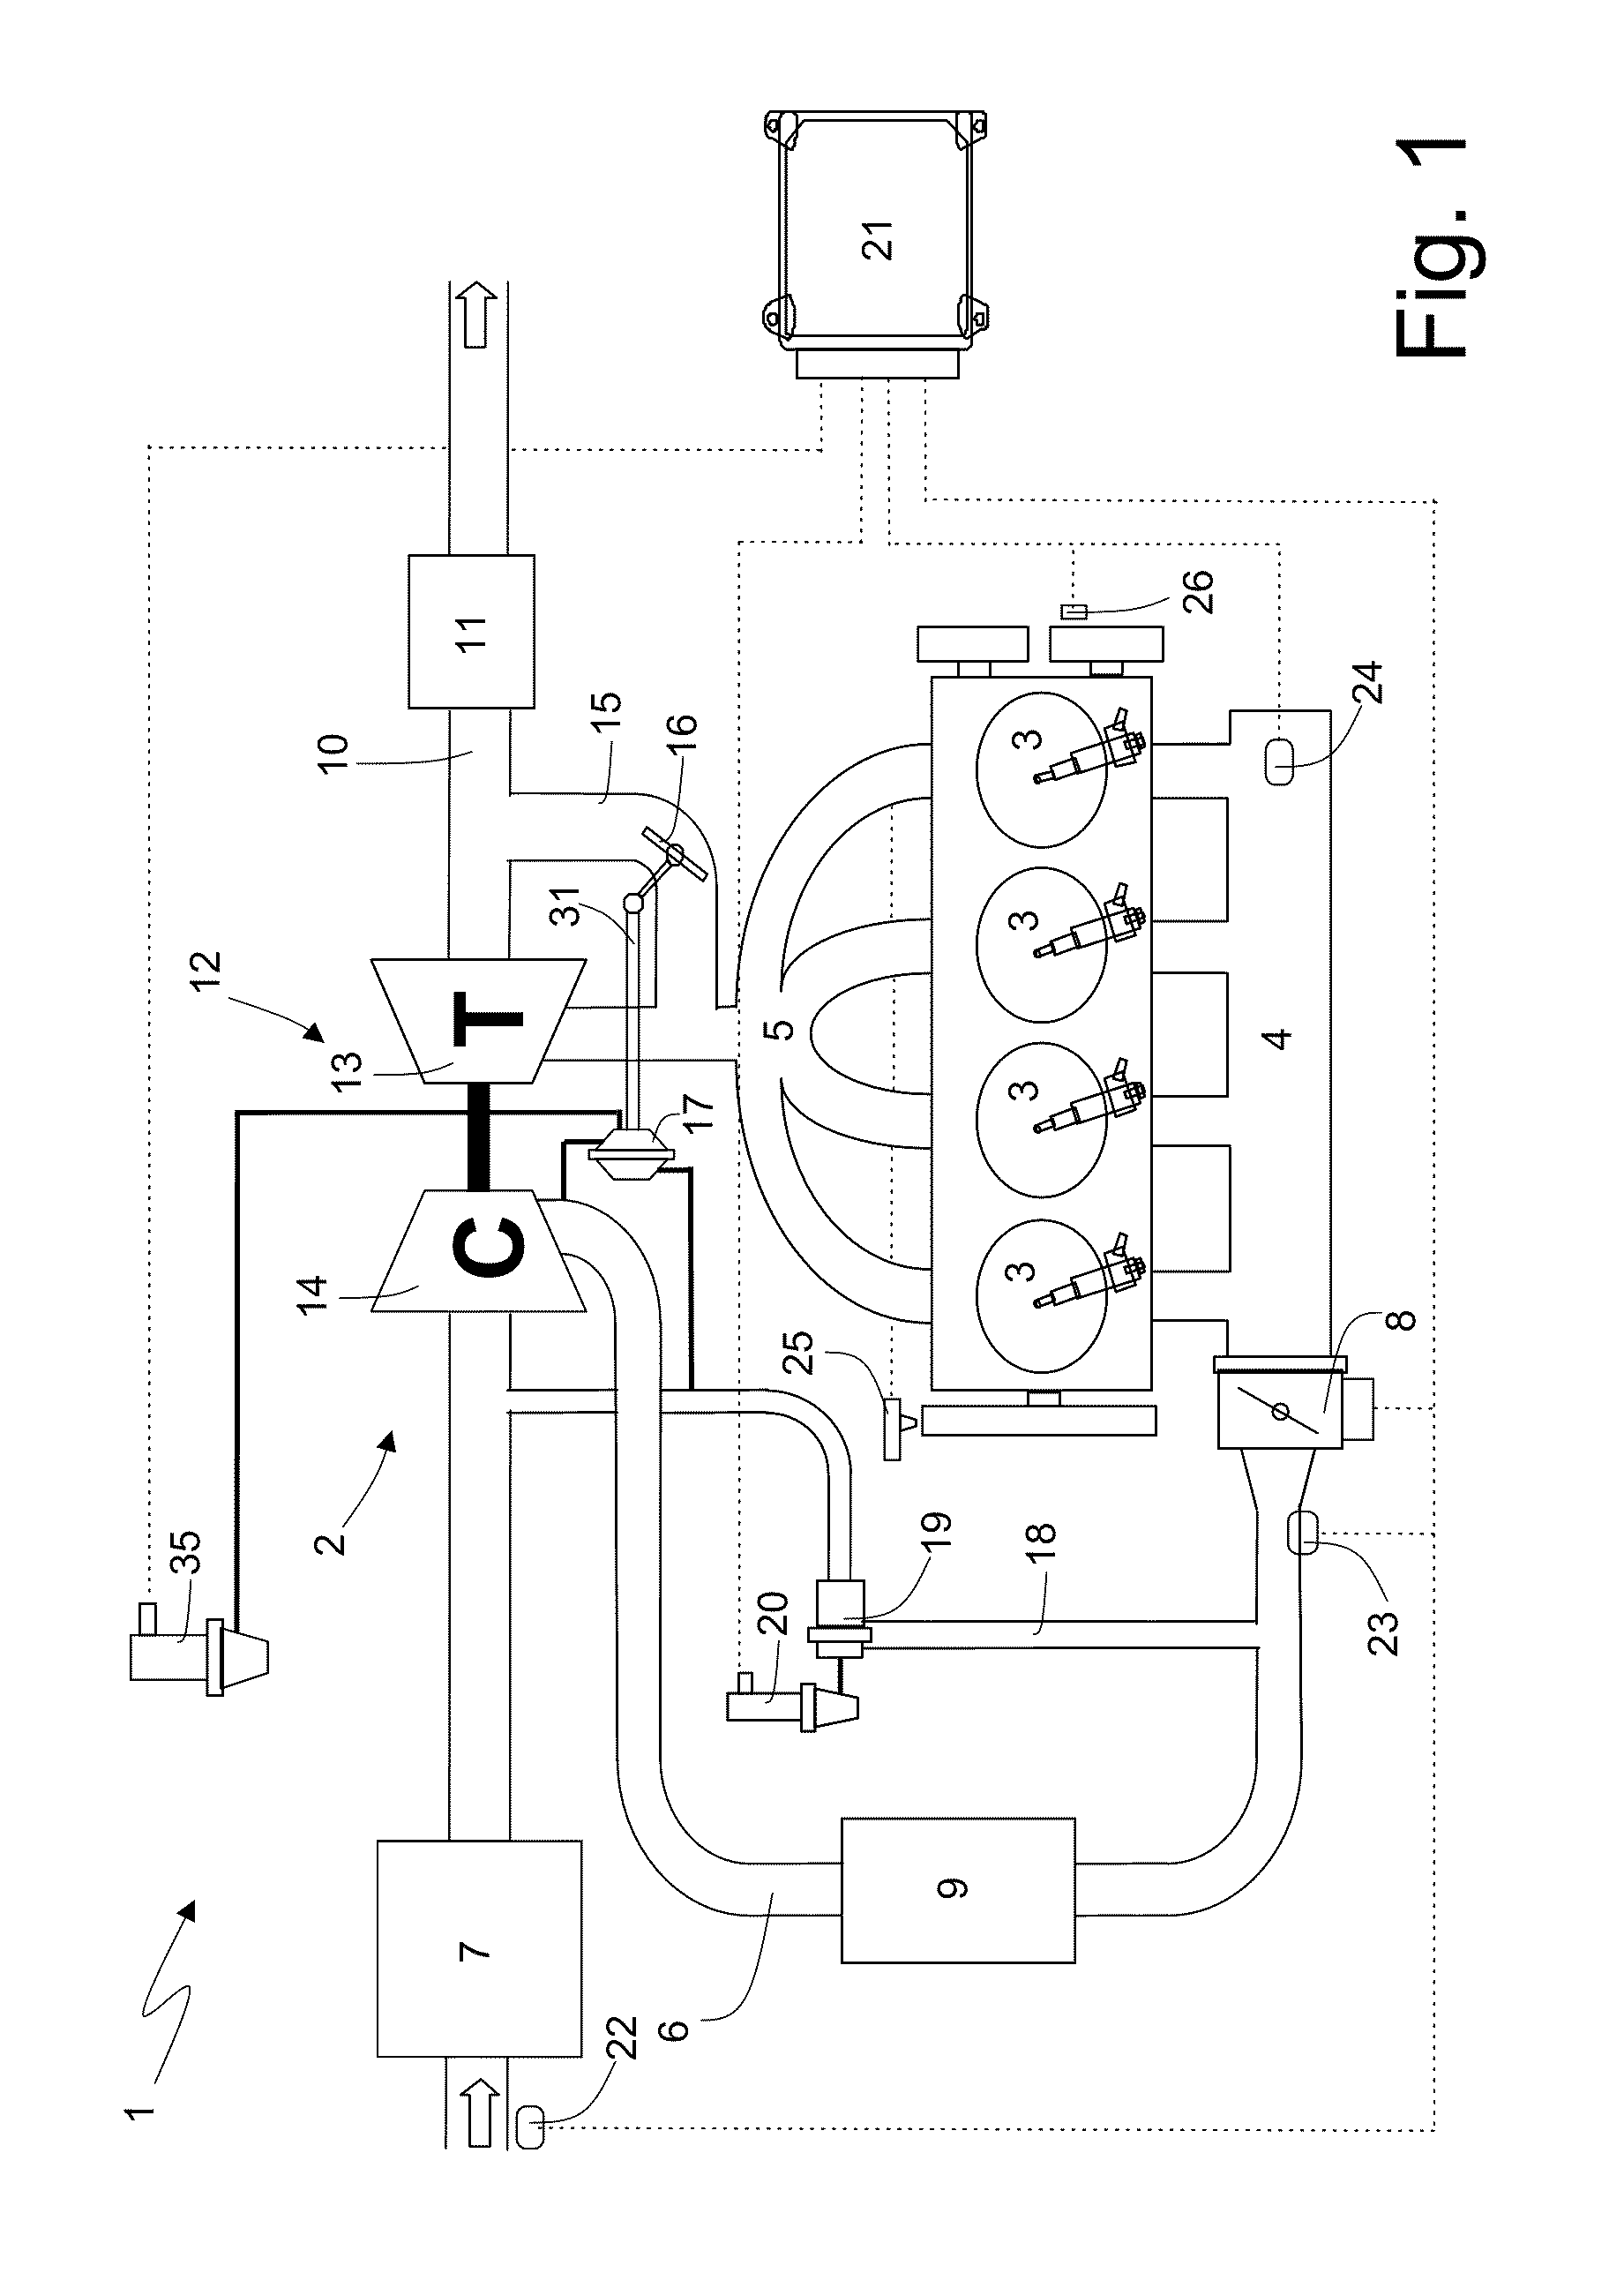 Method for zone controlling a wastegate in a turbocharged internal combustion engine